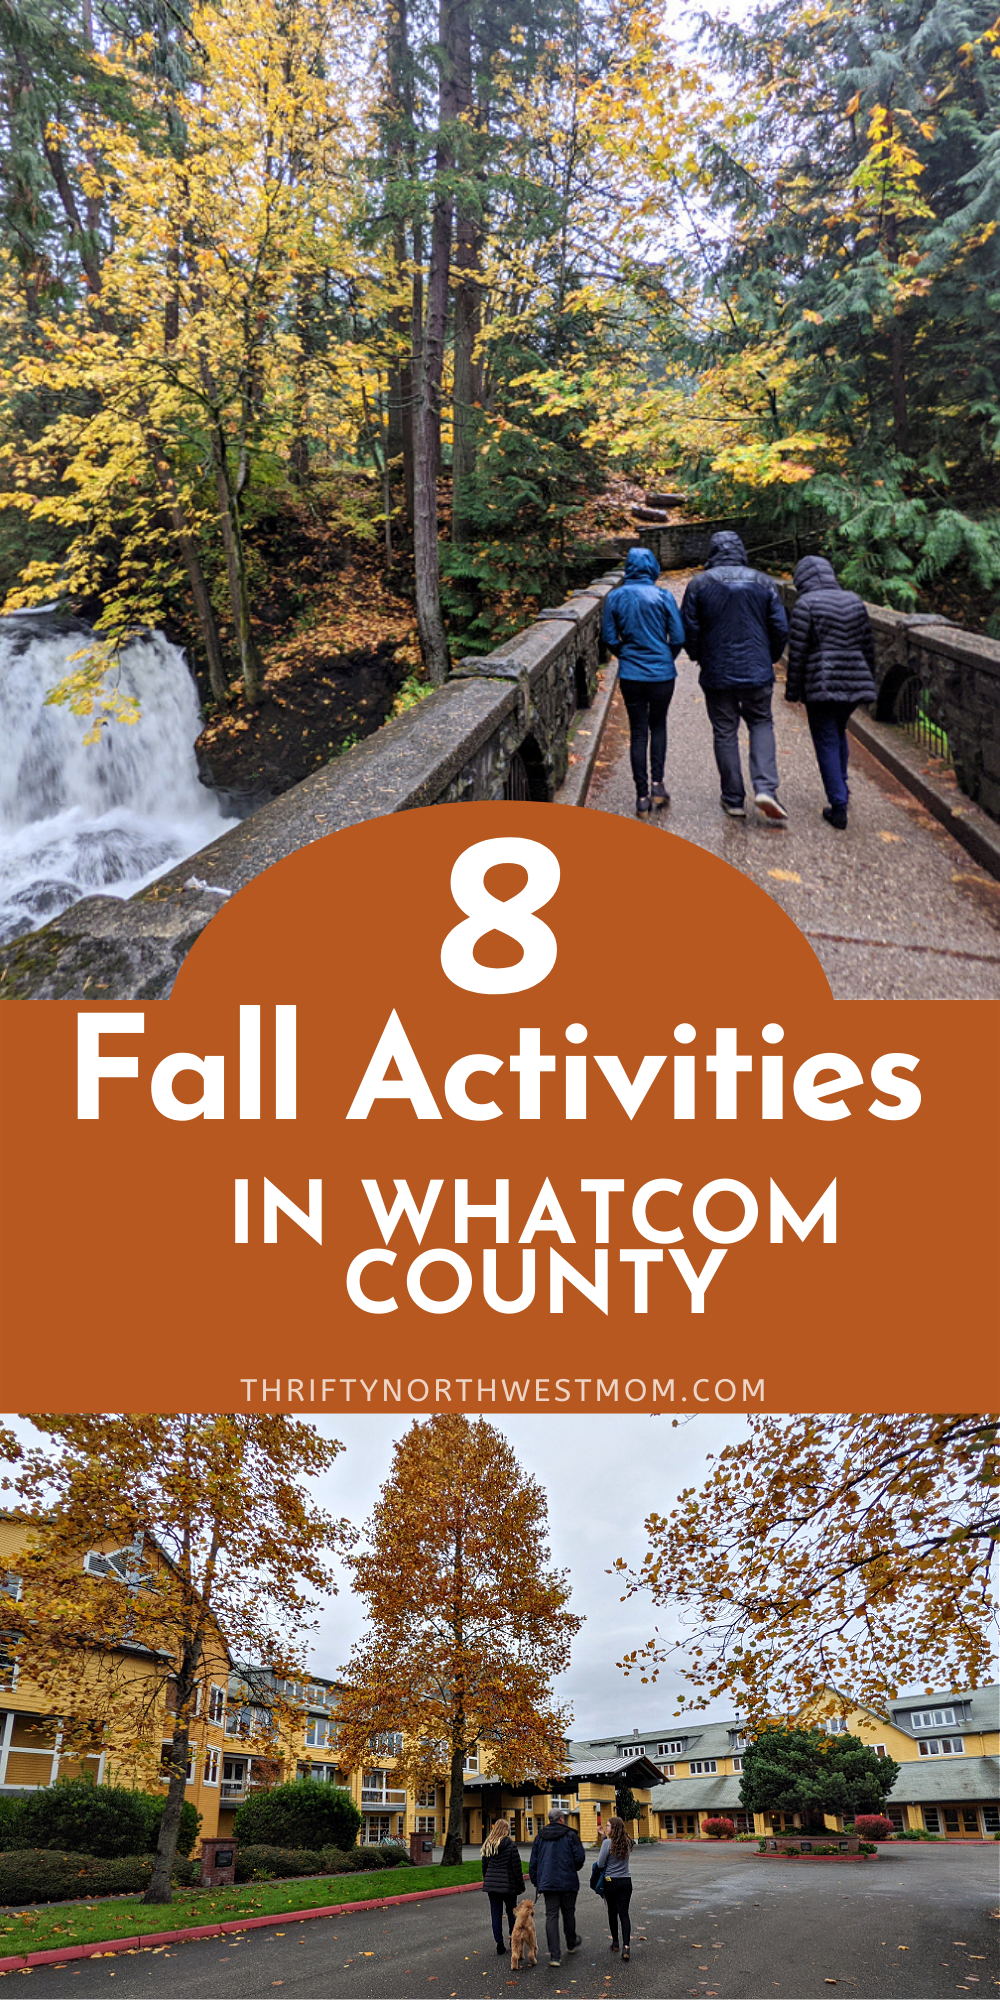 Fall Activities in Whatcom County